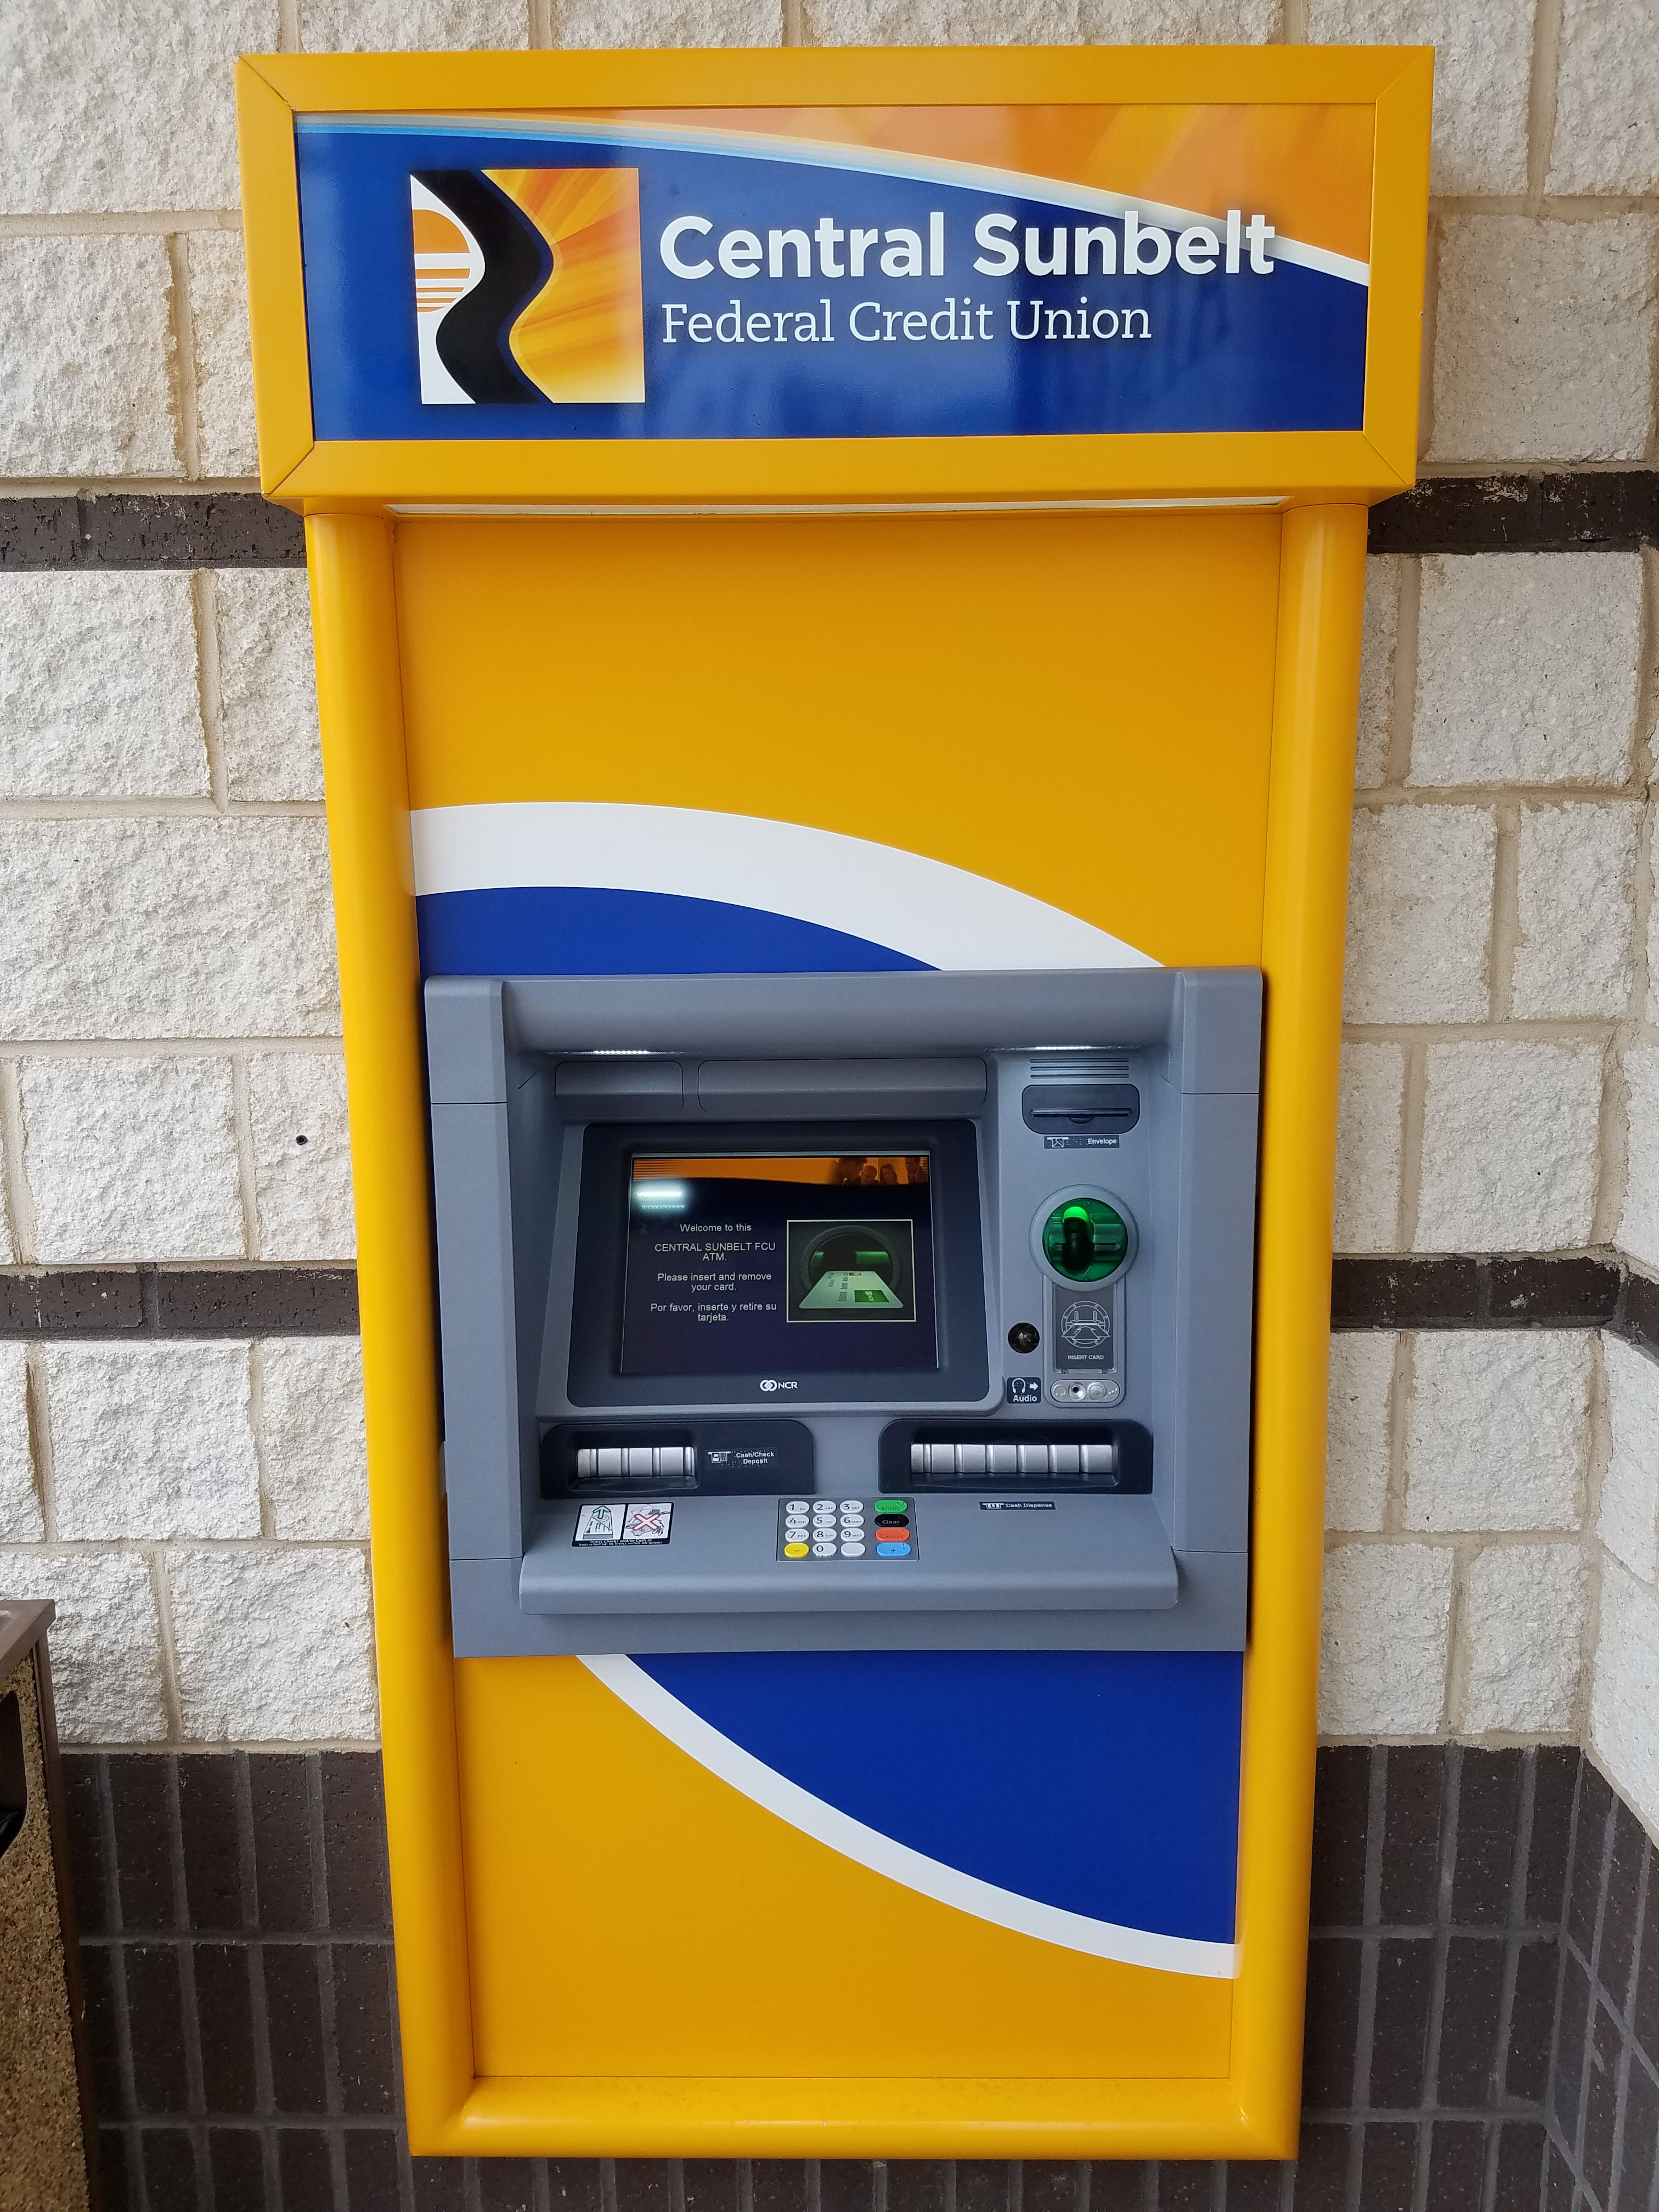 Central Sunbelt offers more free ATMs than even the largest number of banks.  Which bank has the most ATMs?